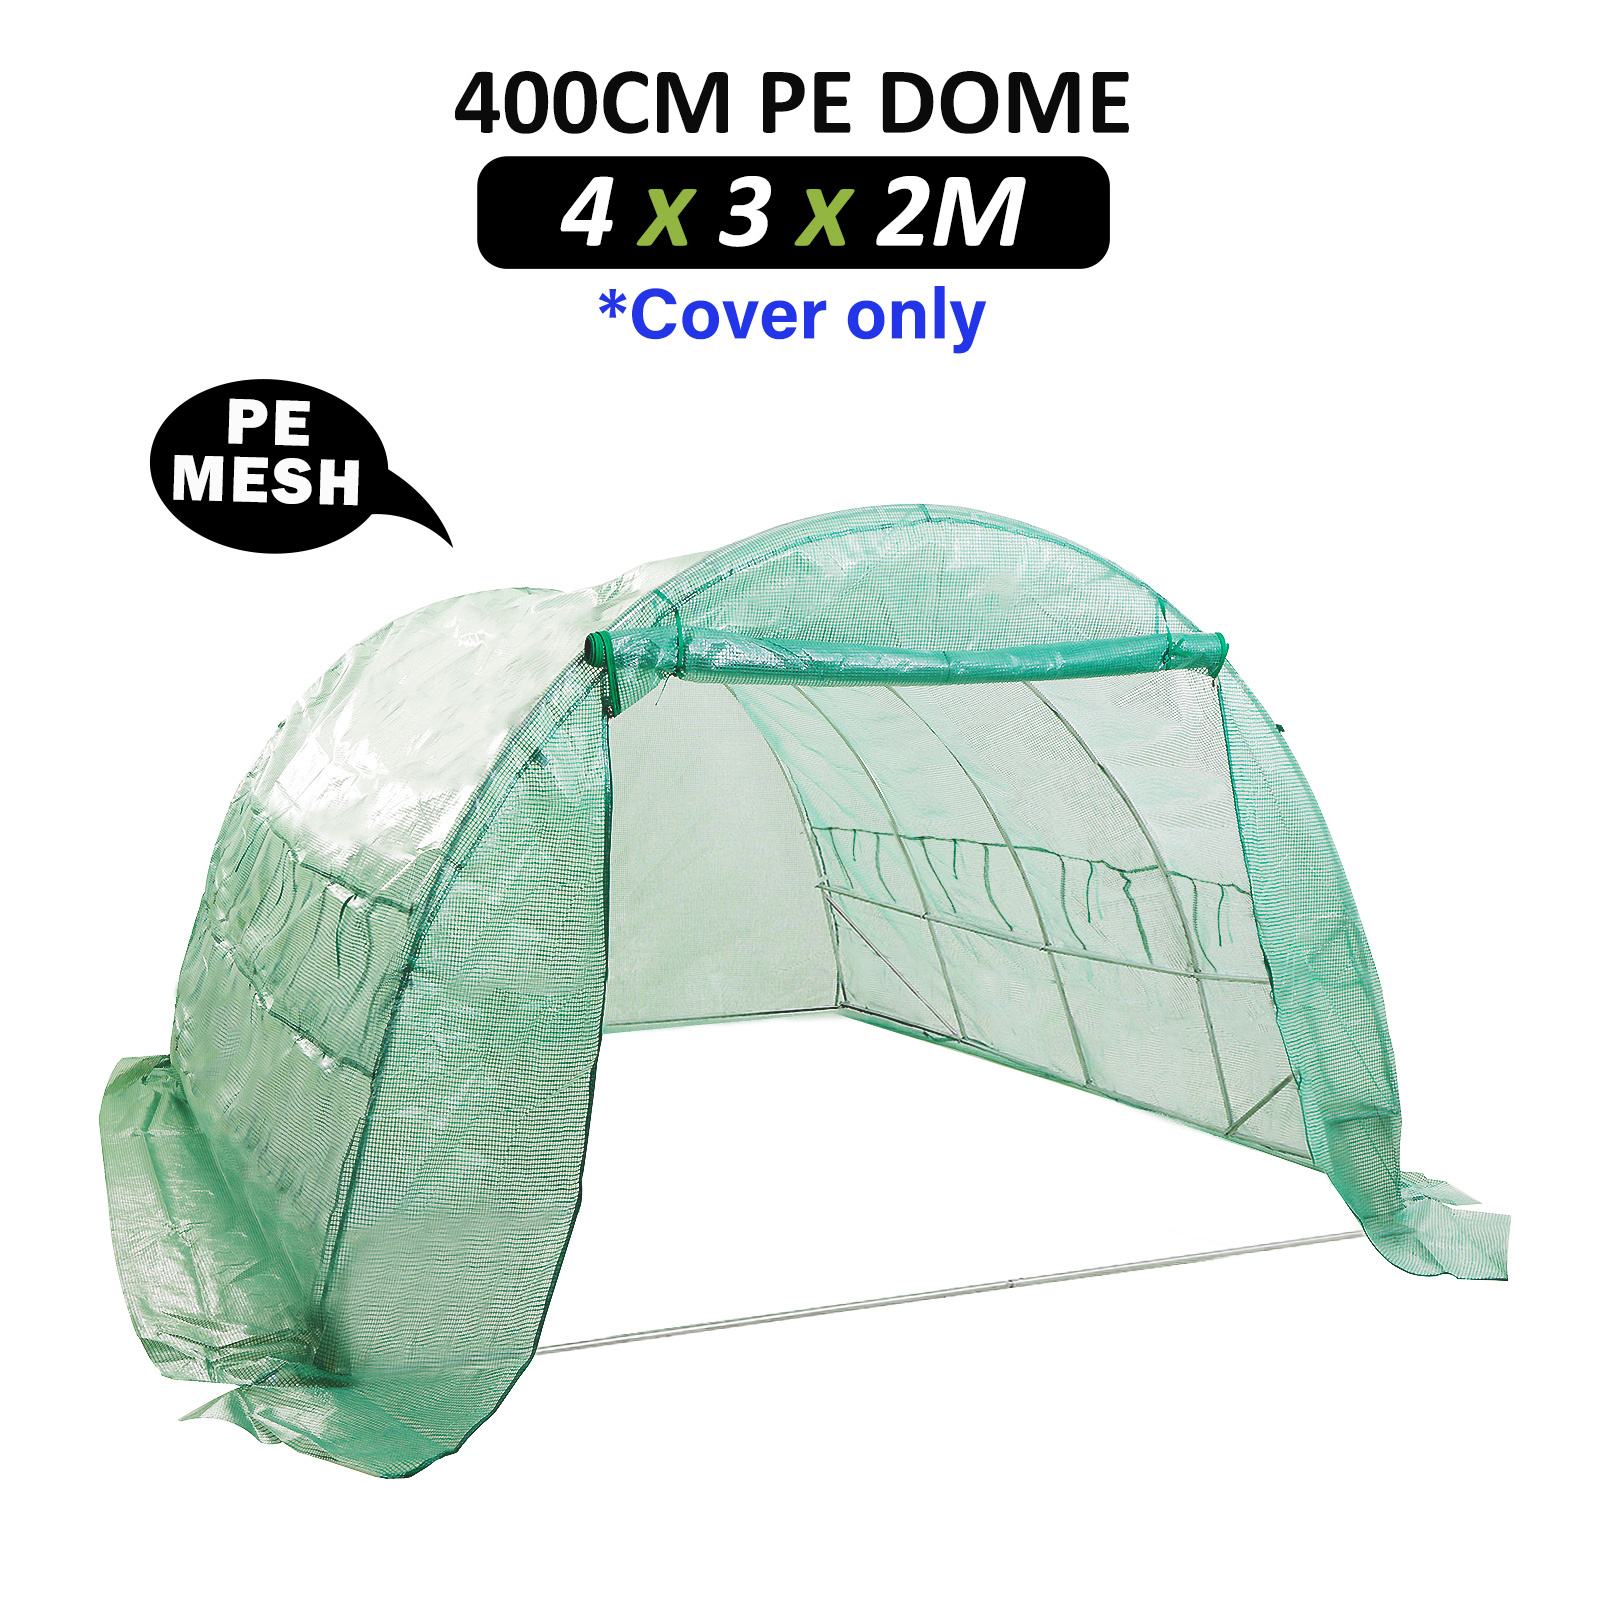 400cm Greenhouse PE Dome Tunnel Cover Only - GREEN